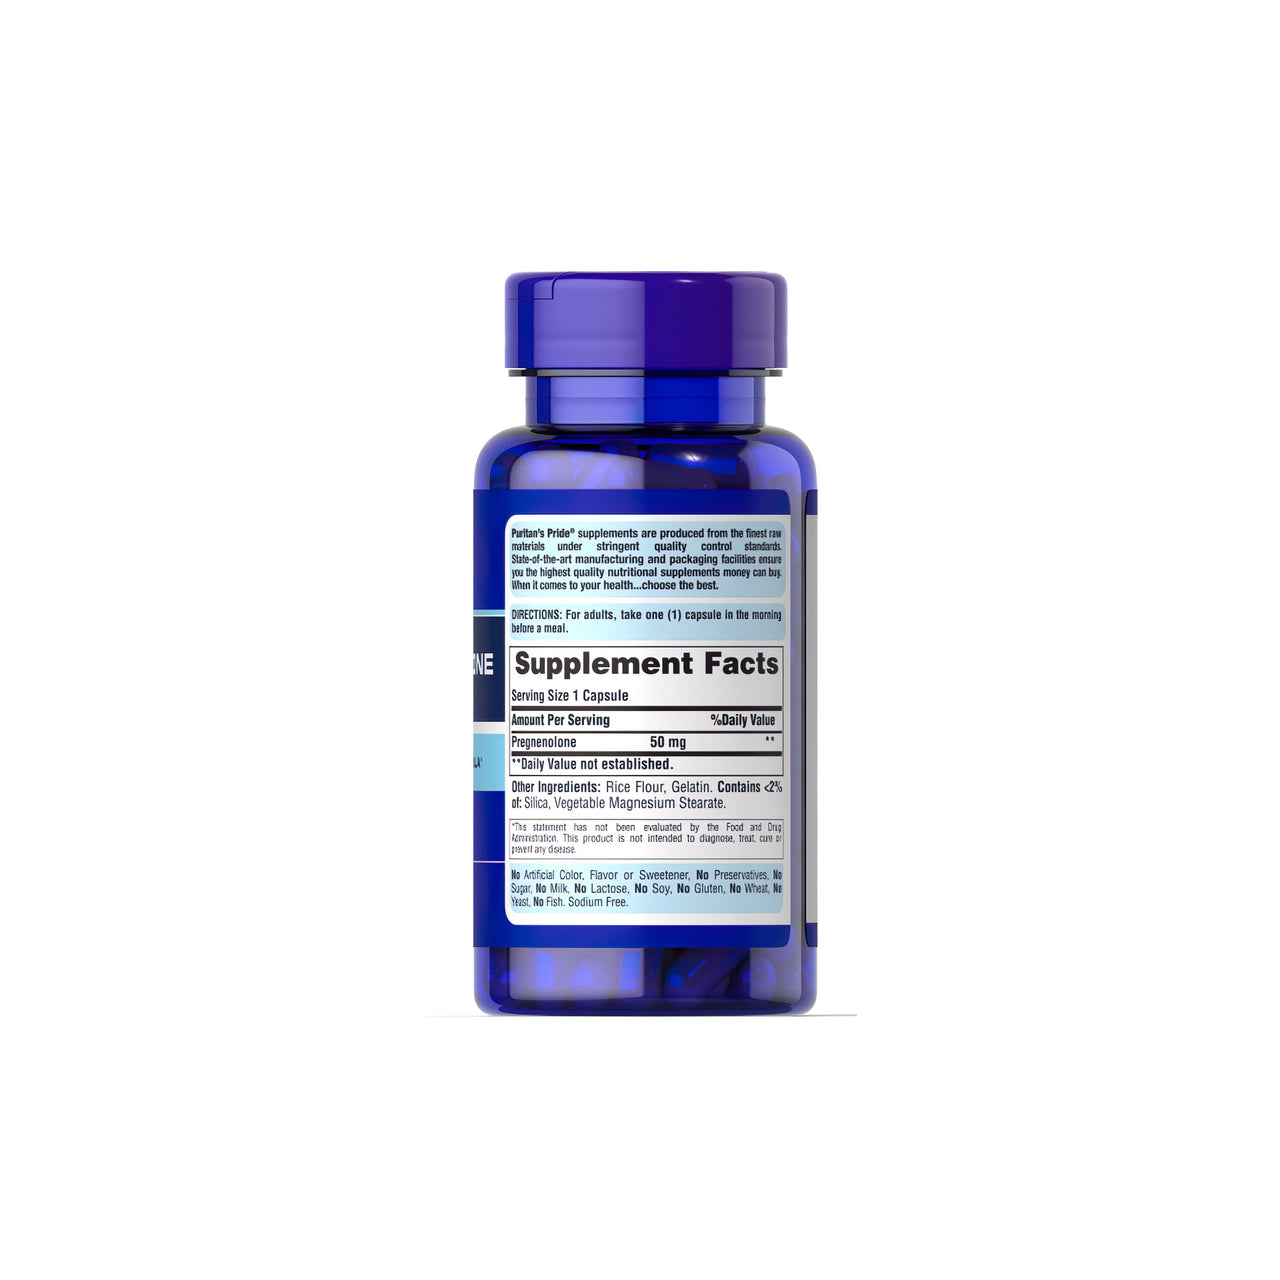 A bottle of Puritan's Pride Pregnenolone 50 mg 90 Rapid Release Capsules for a healthy aging regimen on a white background.